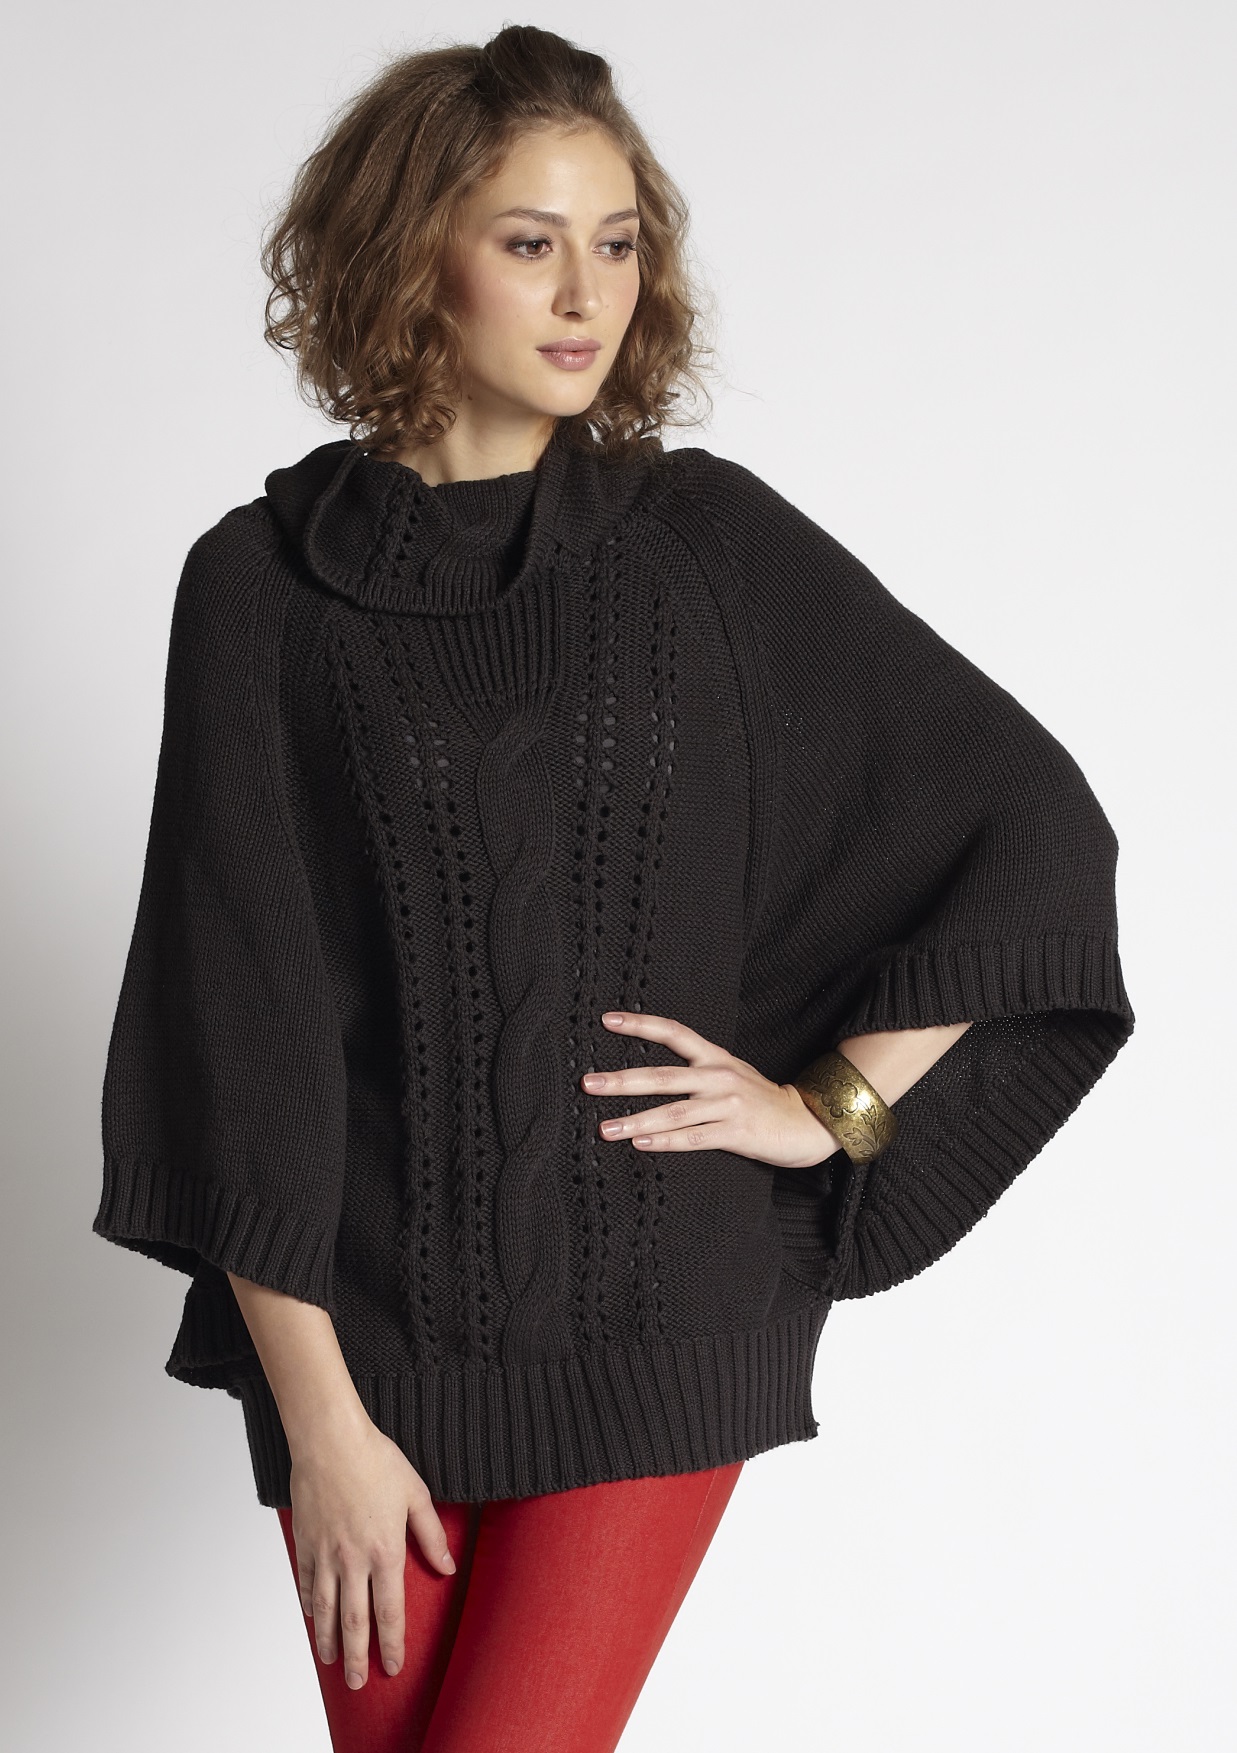 poncho sweater ... mothers-en-vogue-cable-knit-nursing-poncho-sweater- ... CEFQBJH